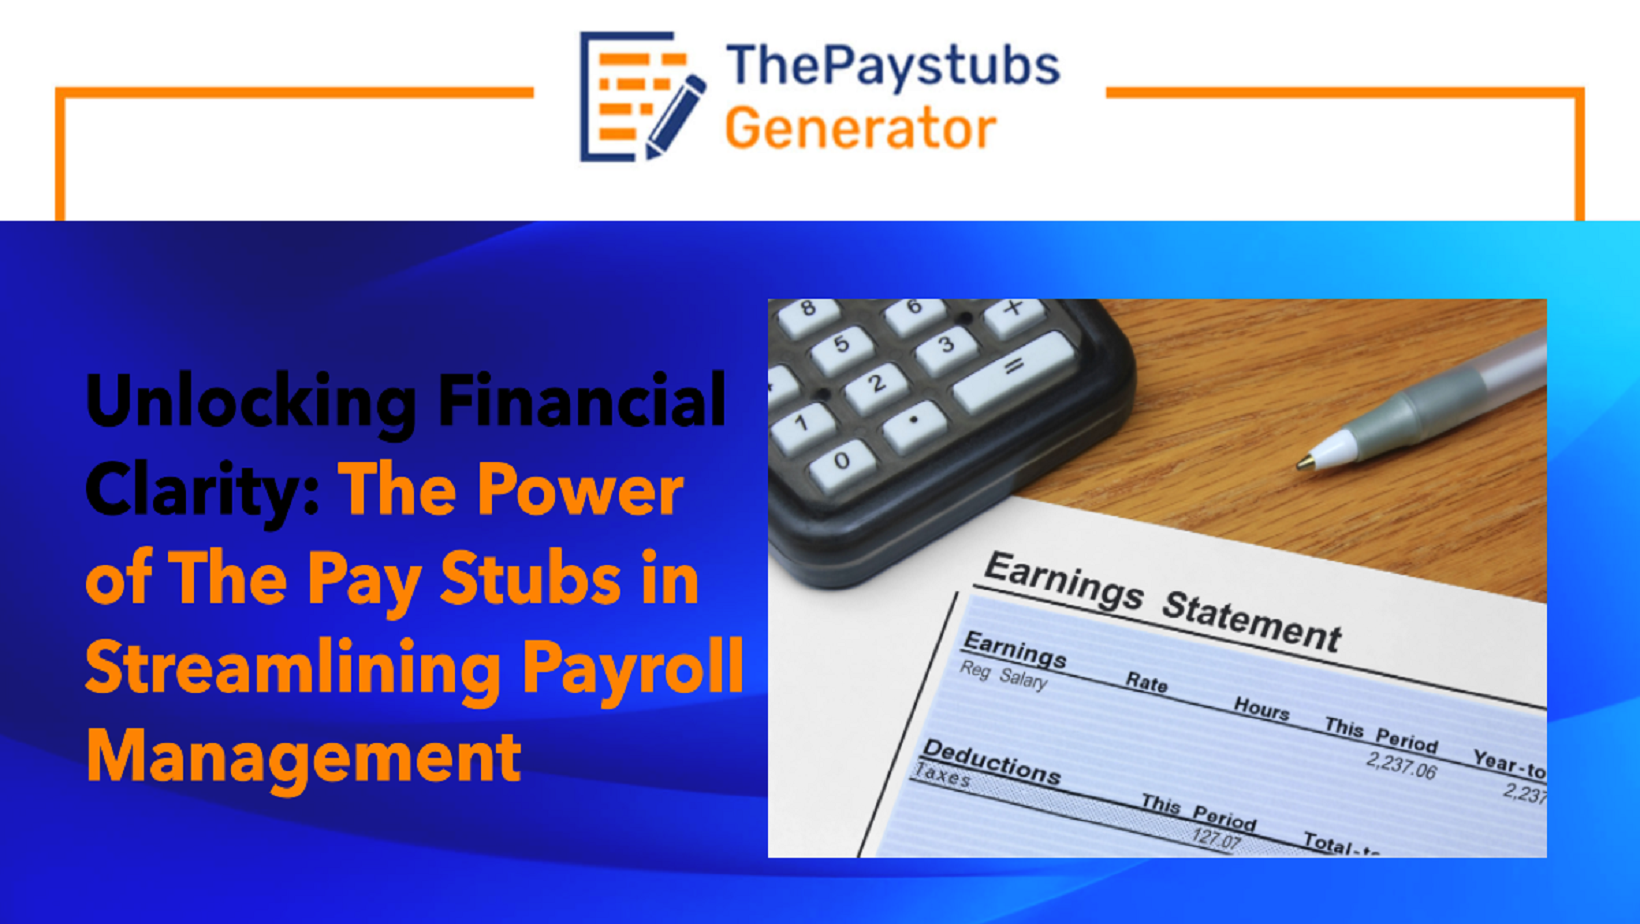 Unlocking Financial Clarity: The Power of The Pay Stubs in Streamlining Payroll Management